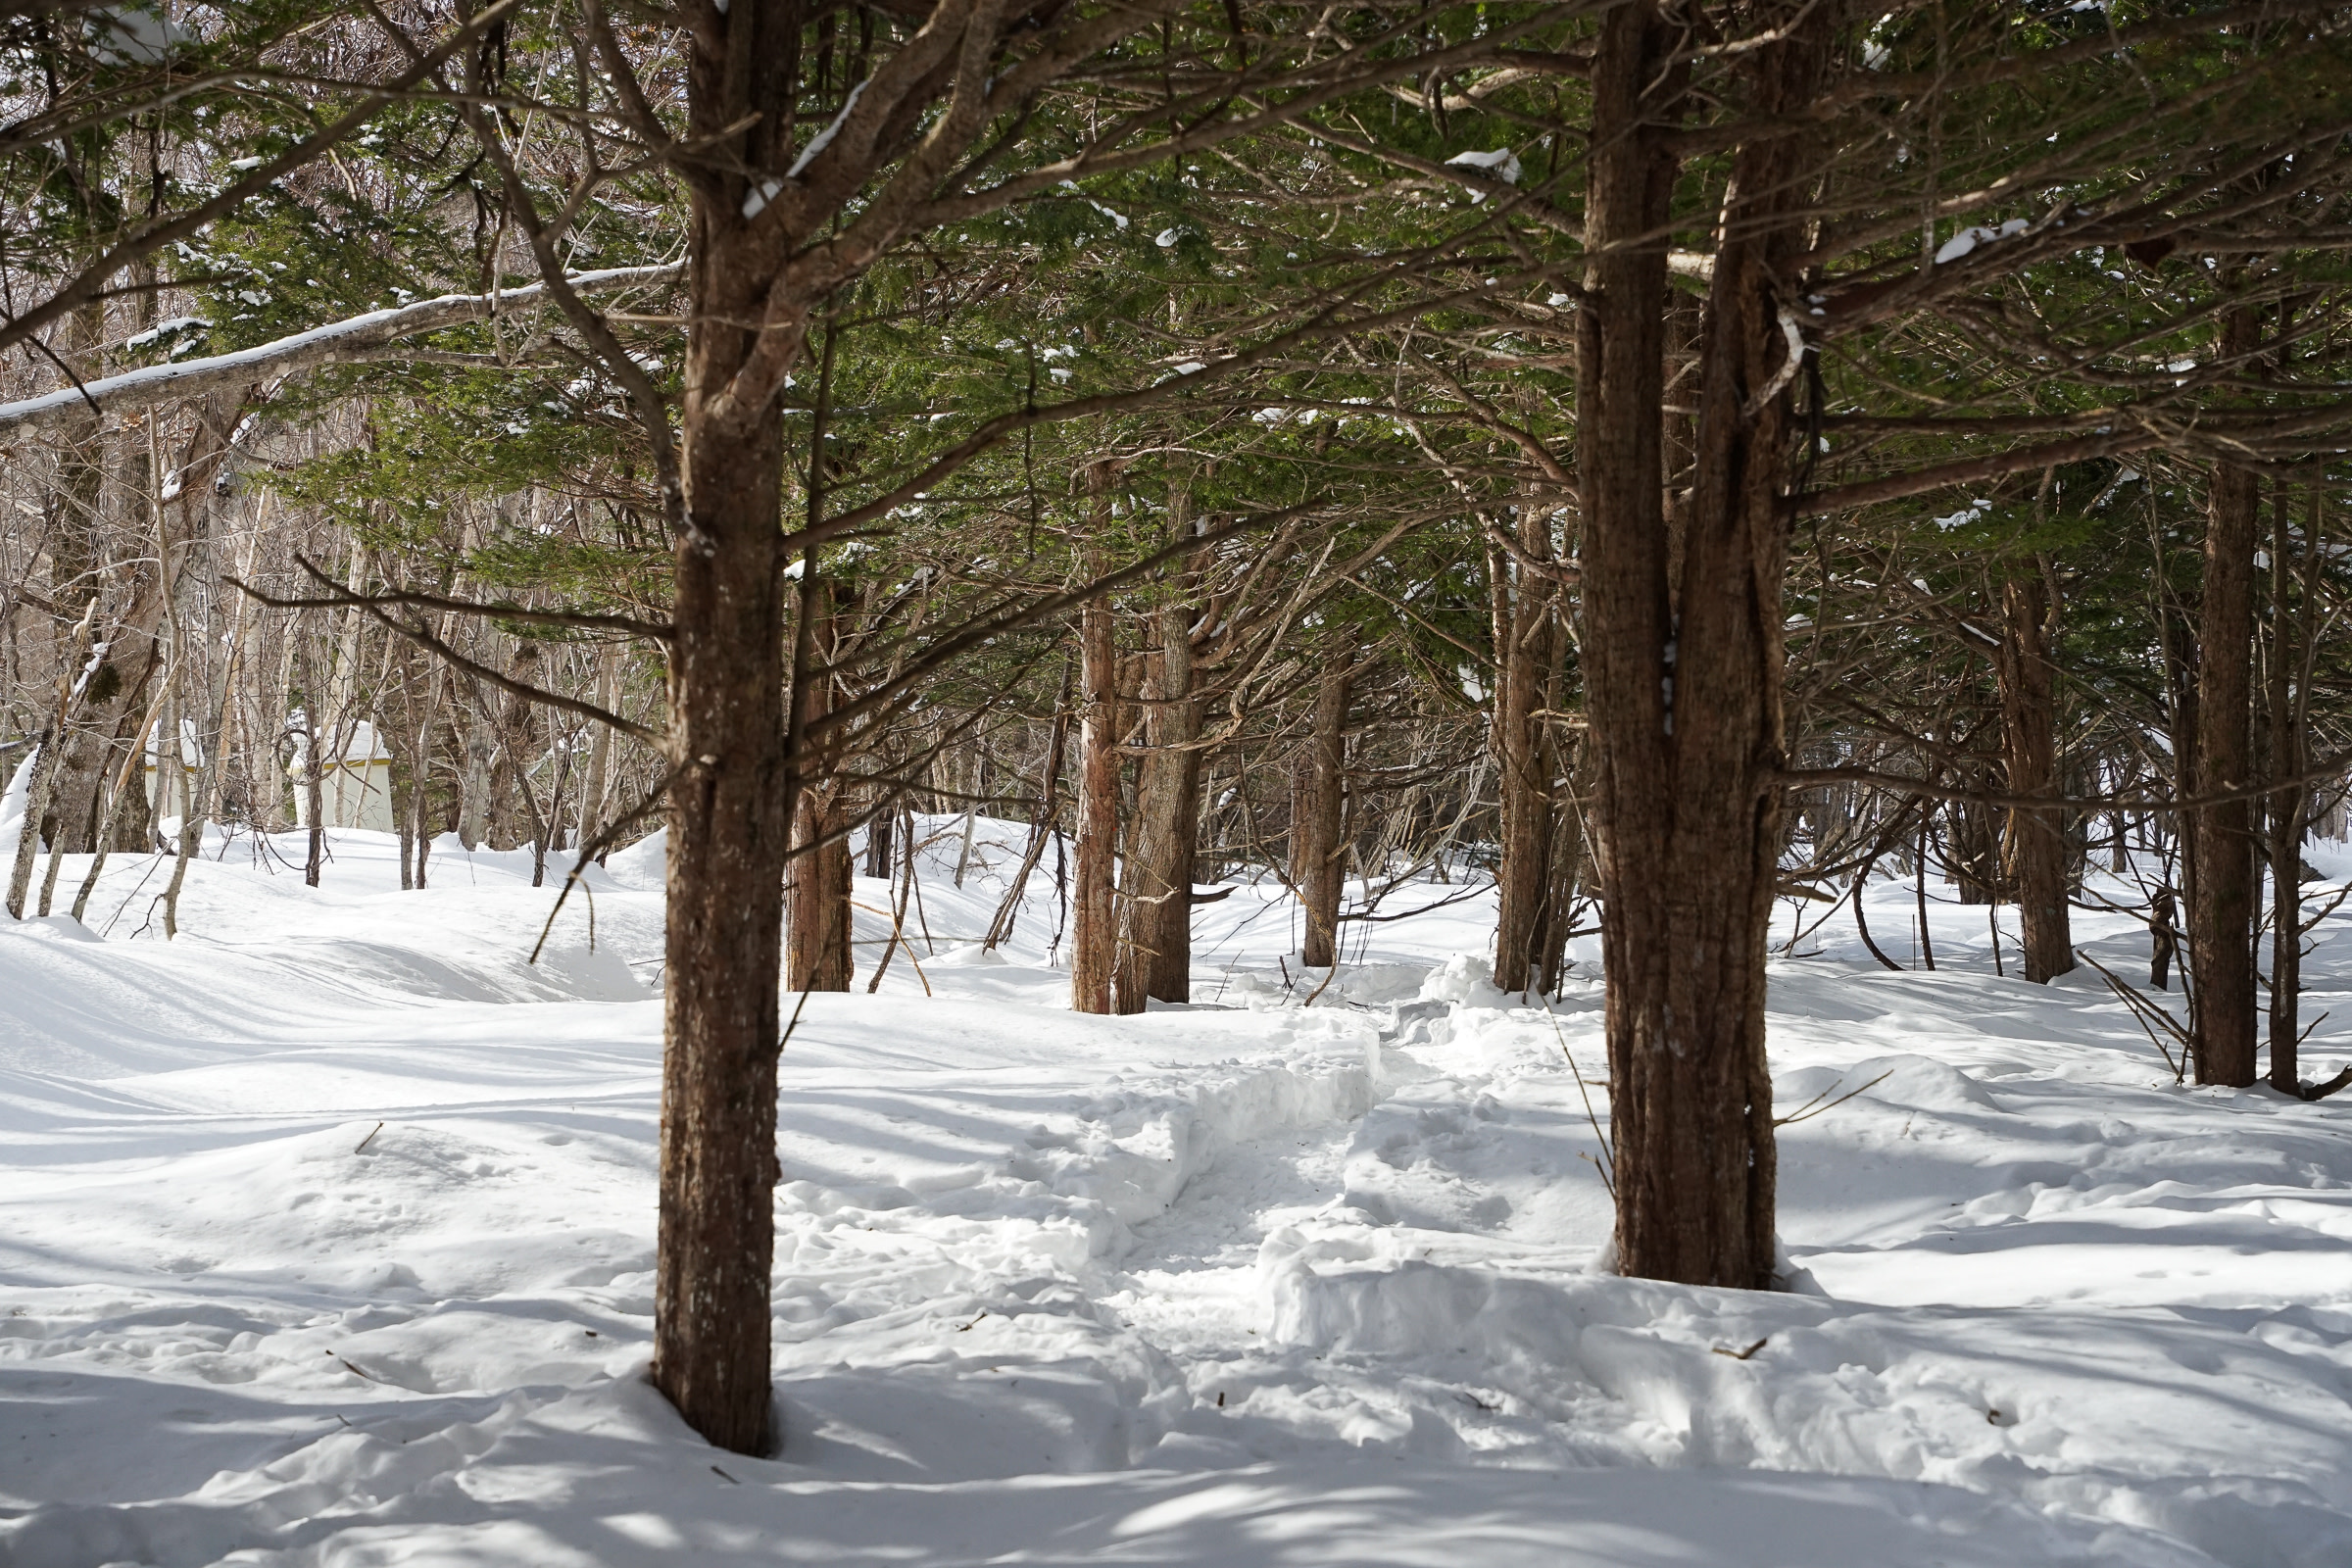 Snowshoe trails through a native yew forest near Shichijo Waterfall.